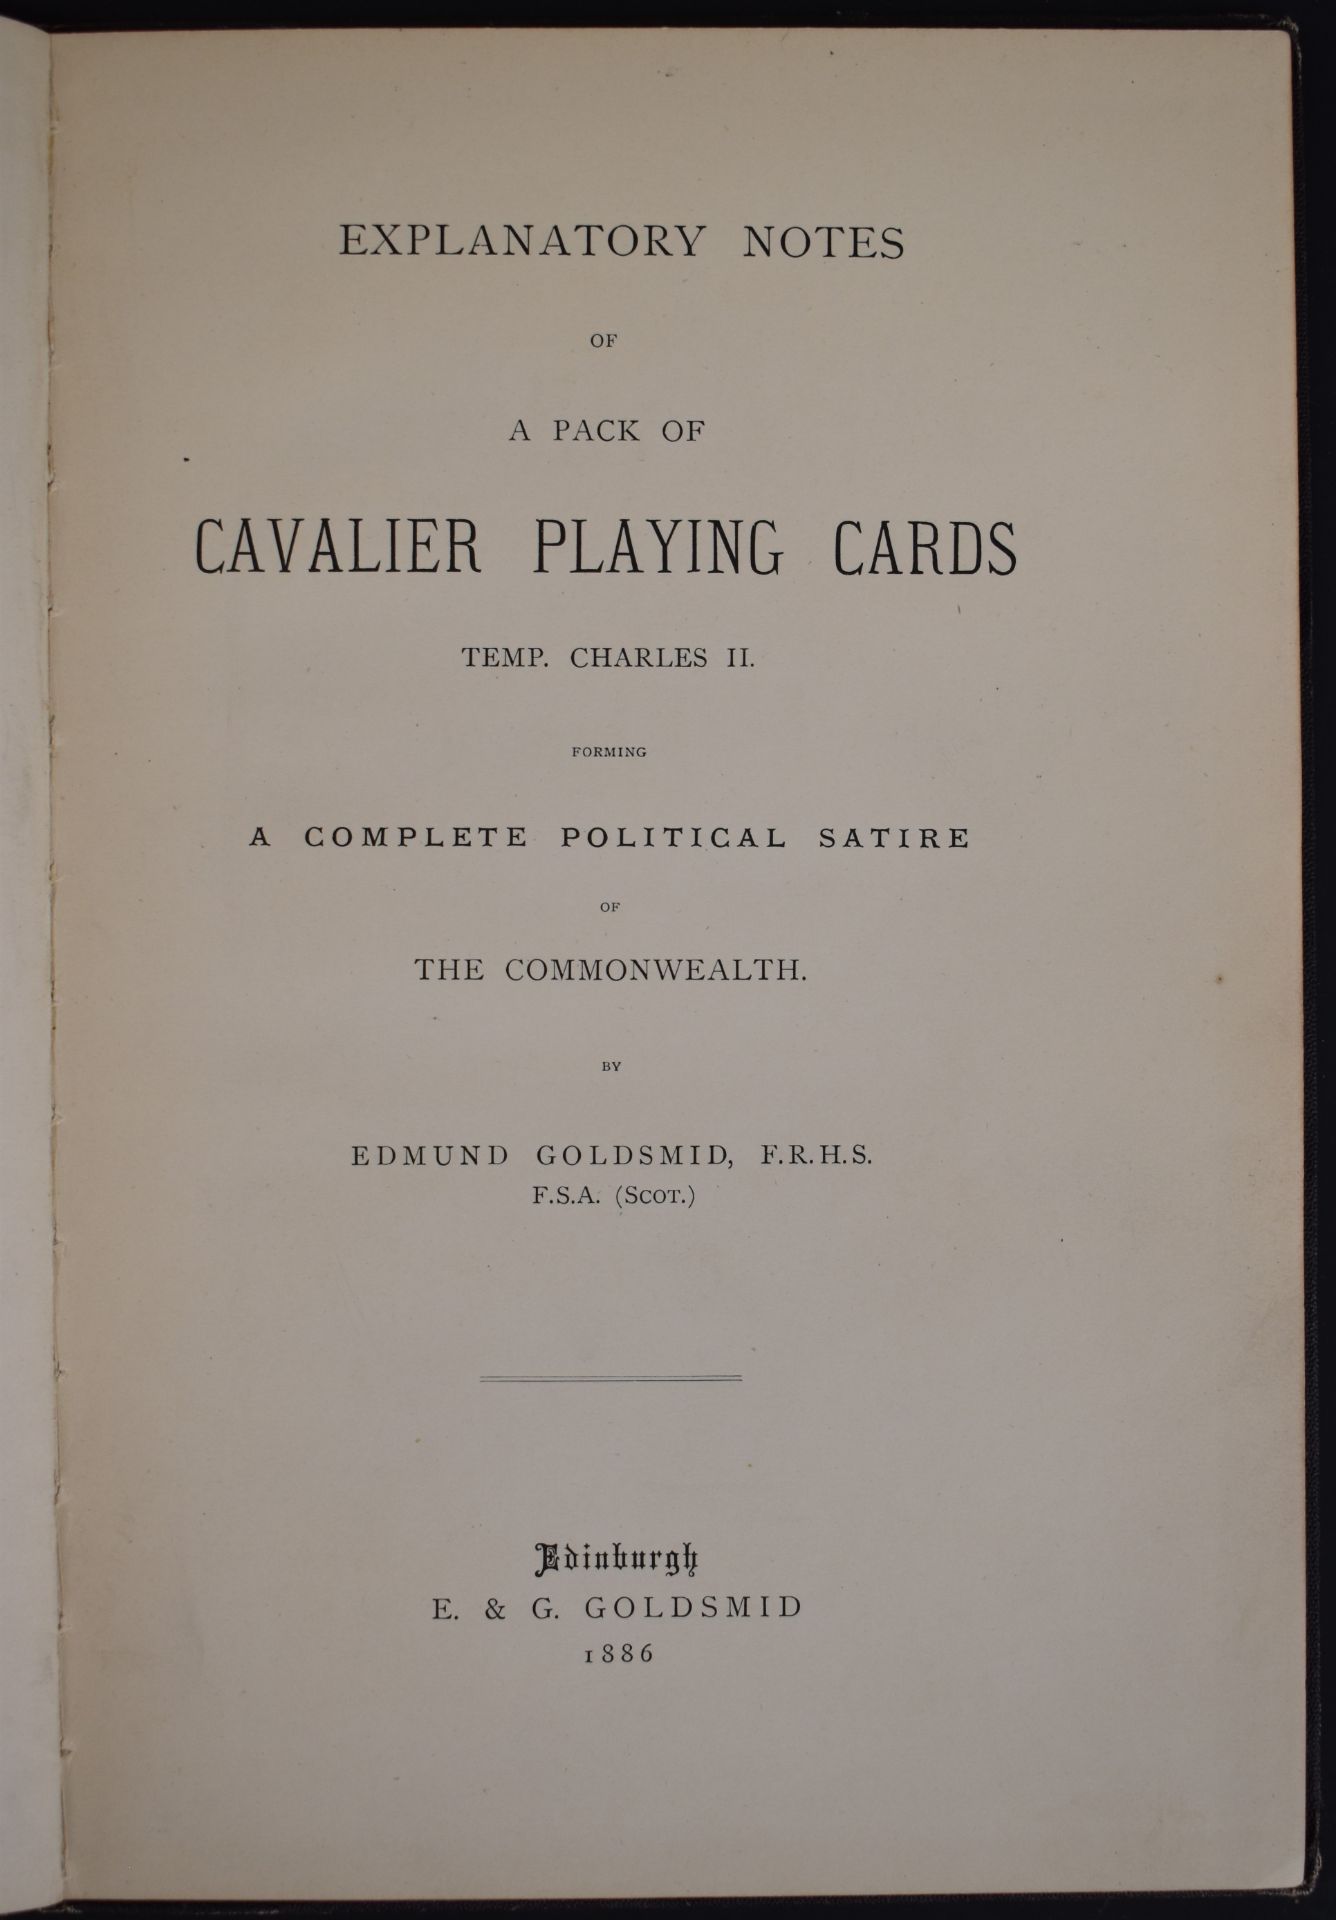 A pack of Cavalier Playing Cards (Temp. Charles II) illustrated in facsimile, by Goldsmid 1886 - Image 2 of 4